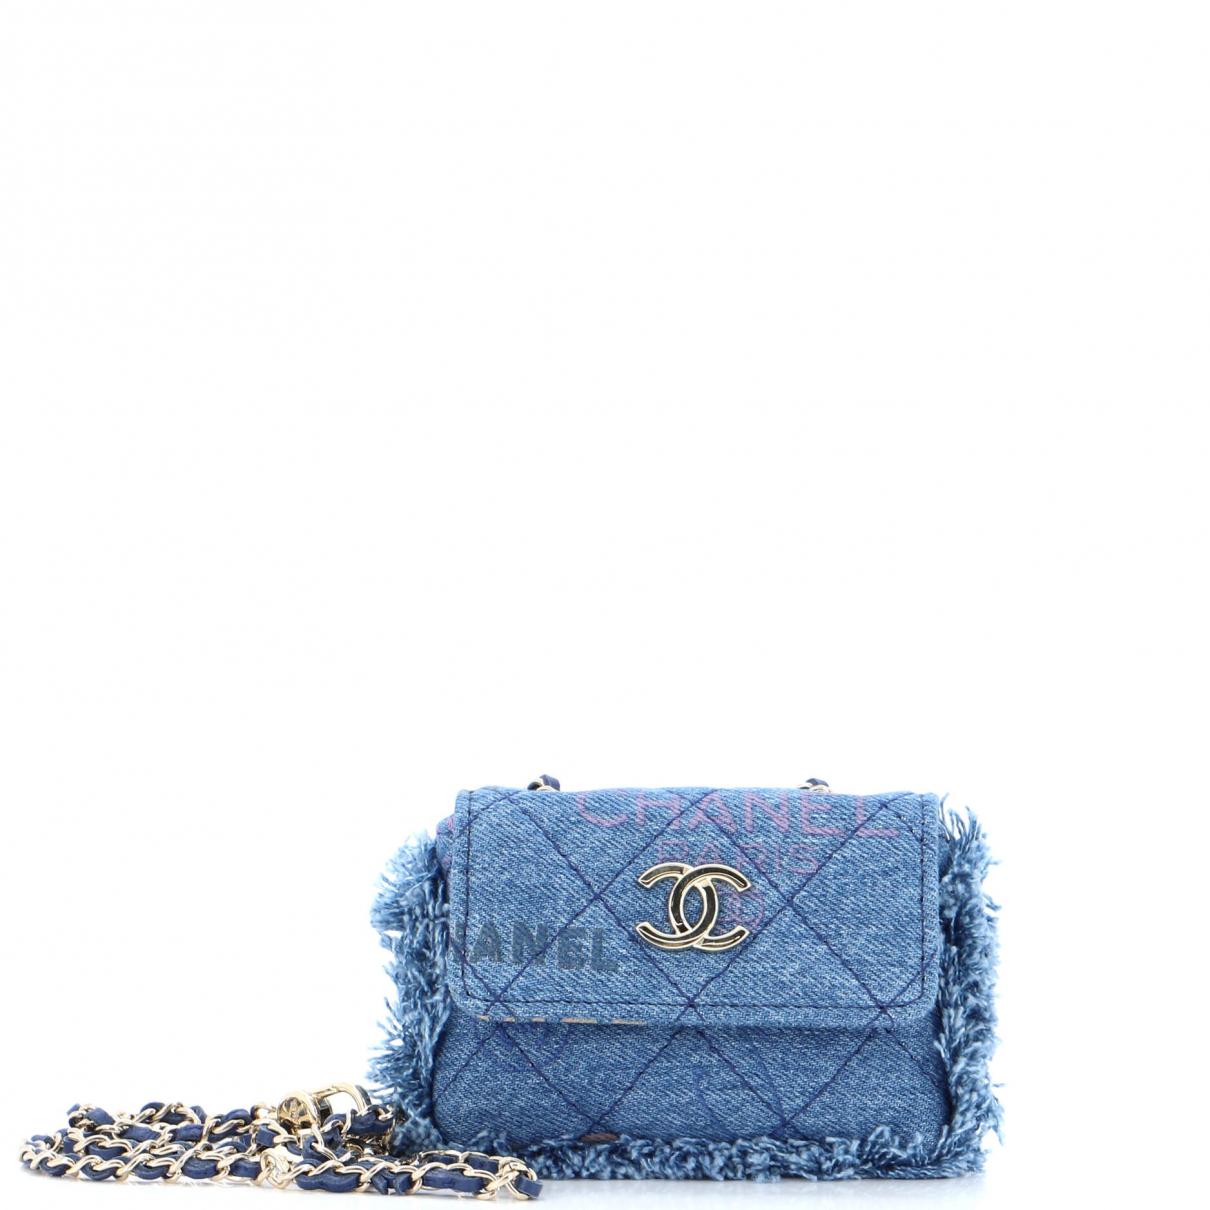 Chanel Handbags | Buy or Sell Designer bags for women - Vestiaire Collective